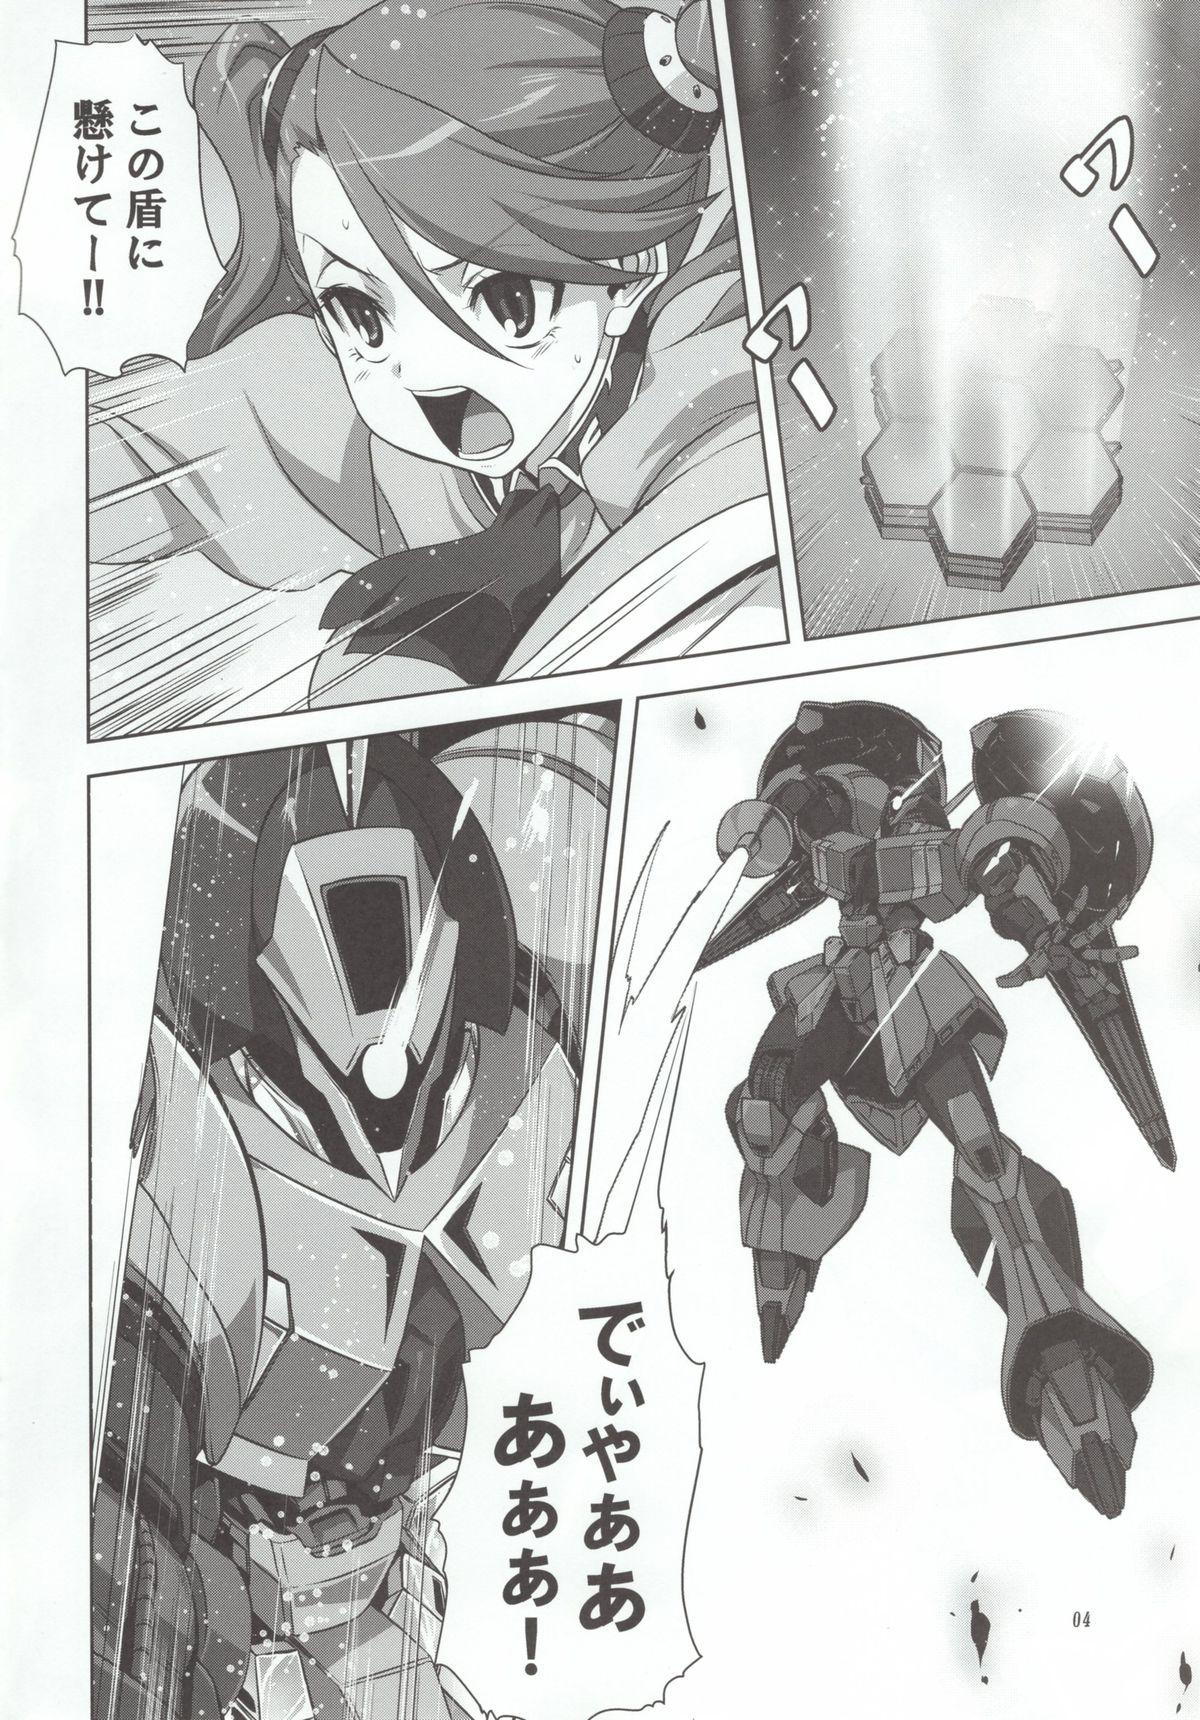 Nylons Try Fight! - Gundam build fighters try Spoon - Page 4